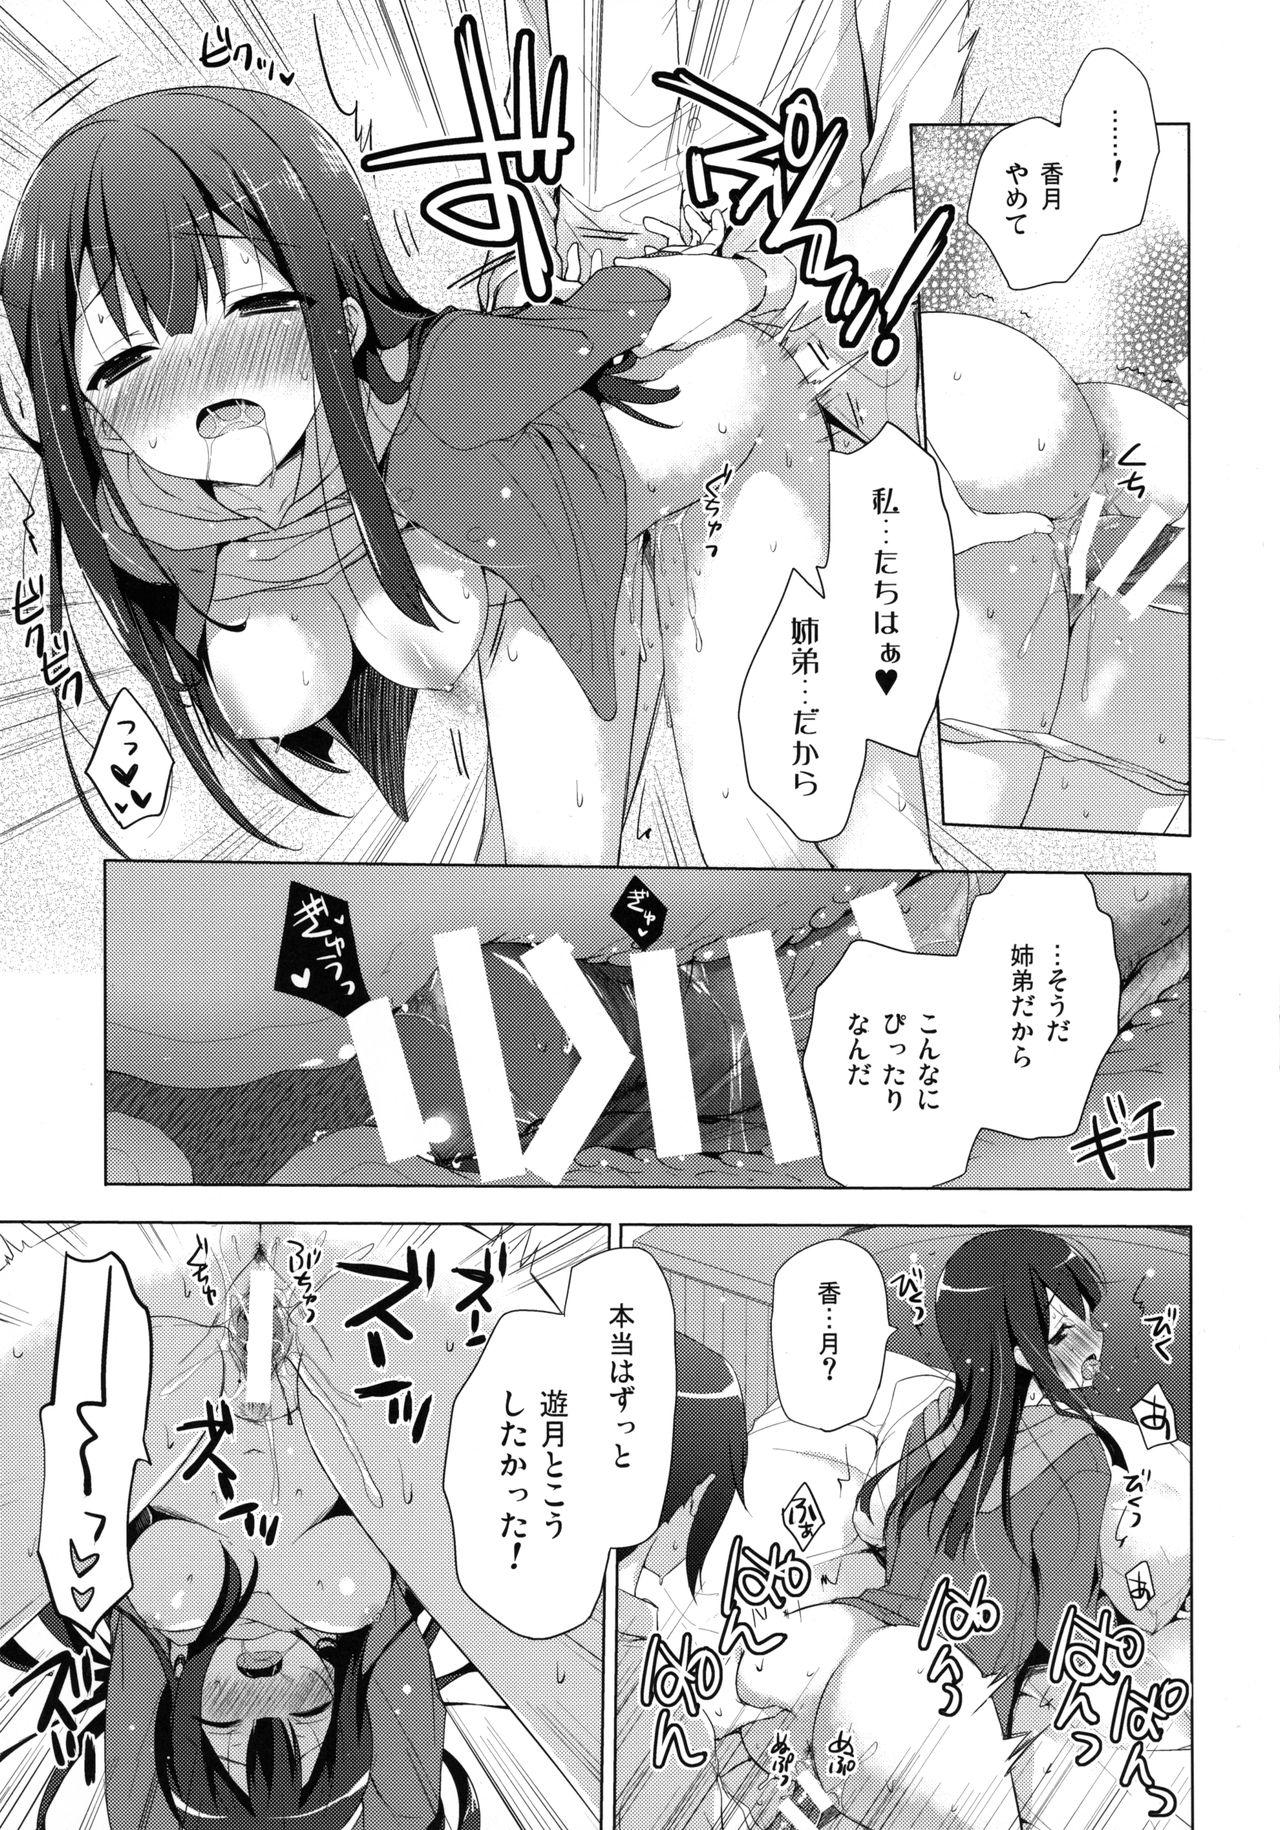 Virginity G.I.R.L - Selector infected wixoss Lolicon - Page 11